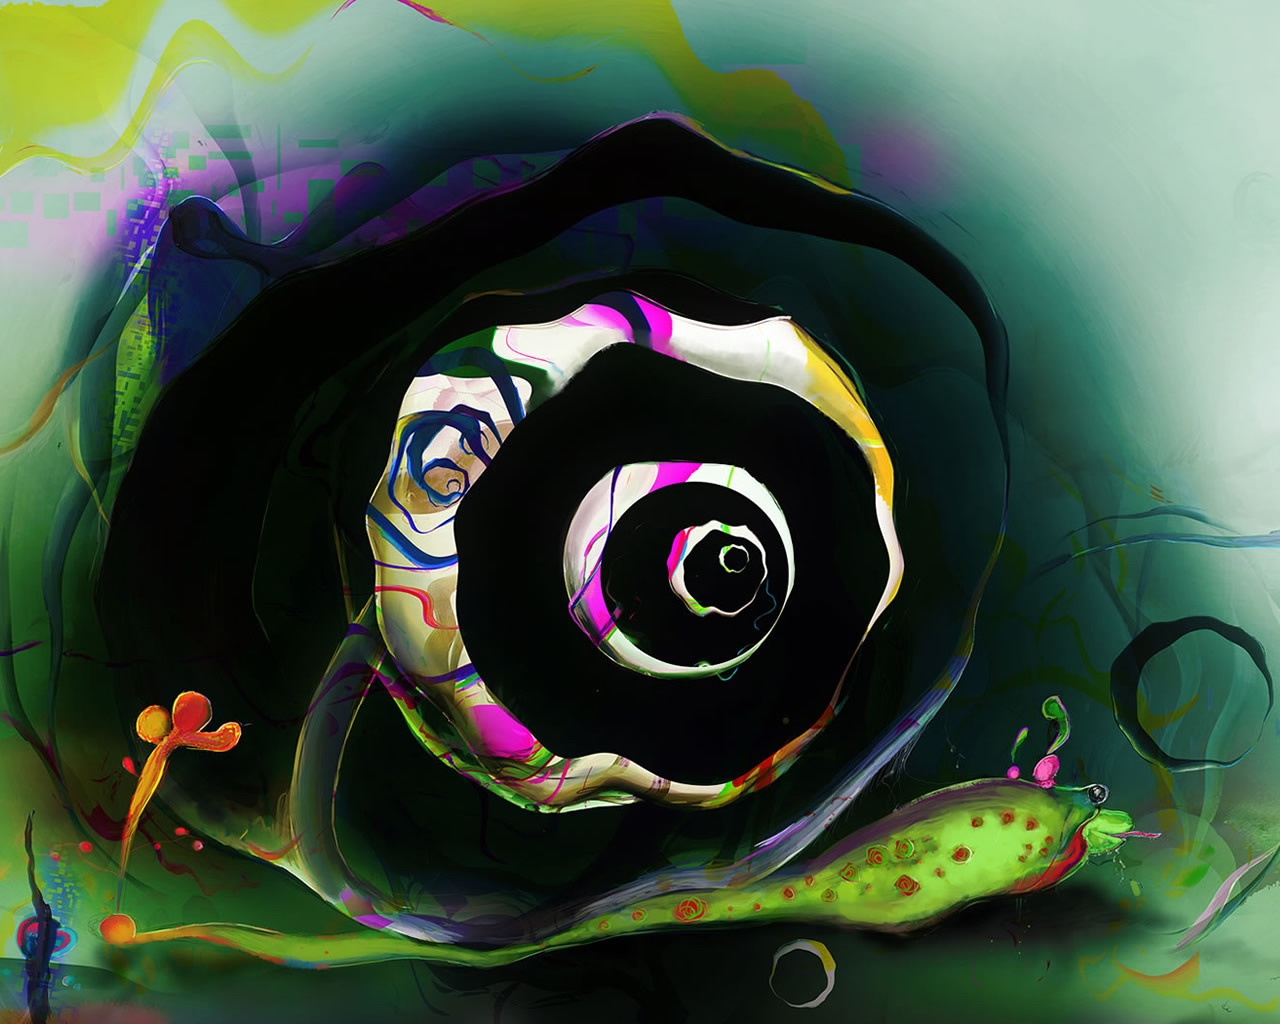 Colourful World Eye for 1280 x 1024 resolution